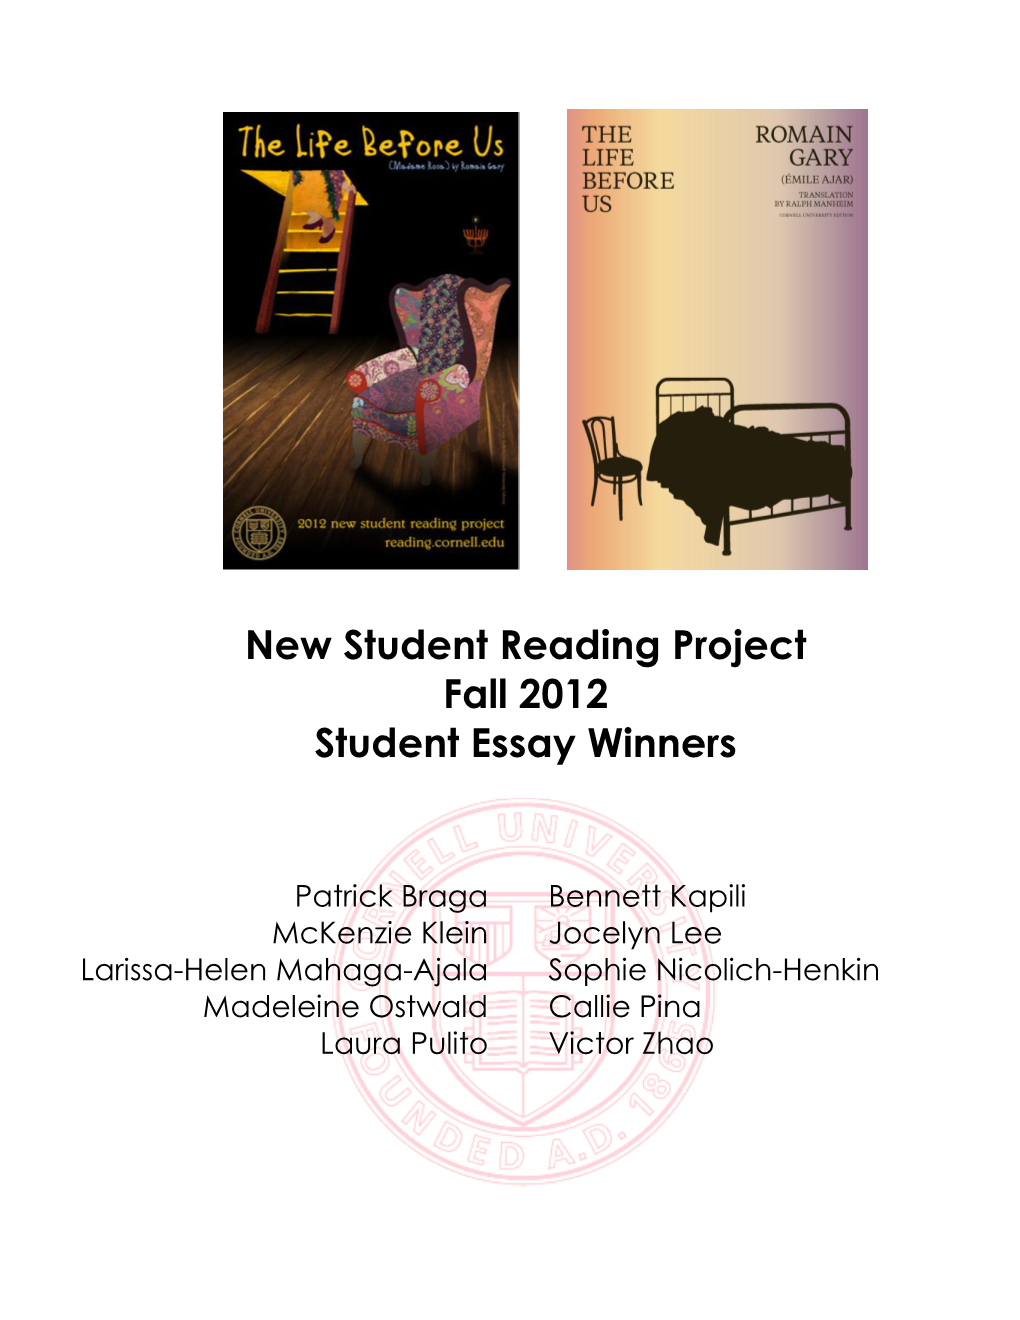 New Student Reading Project Fall 2012 Student Essay Winners